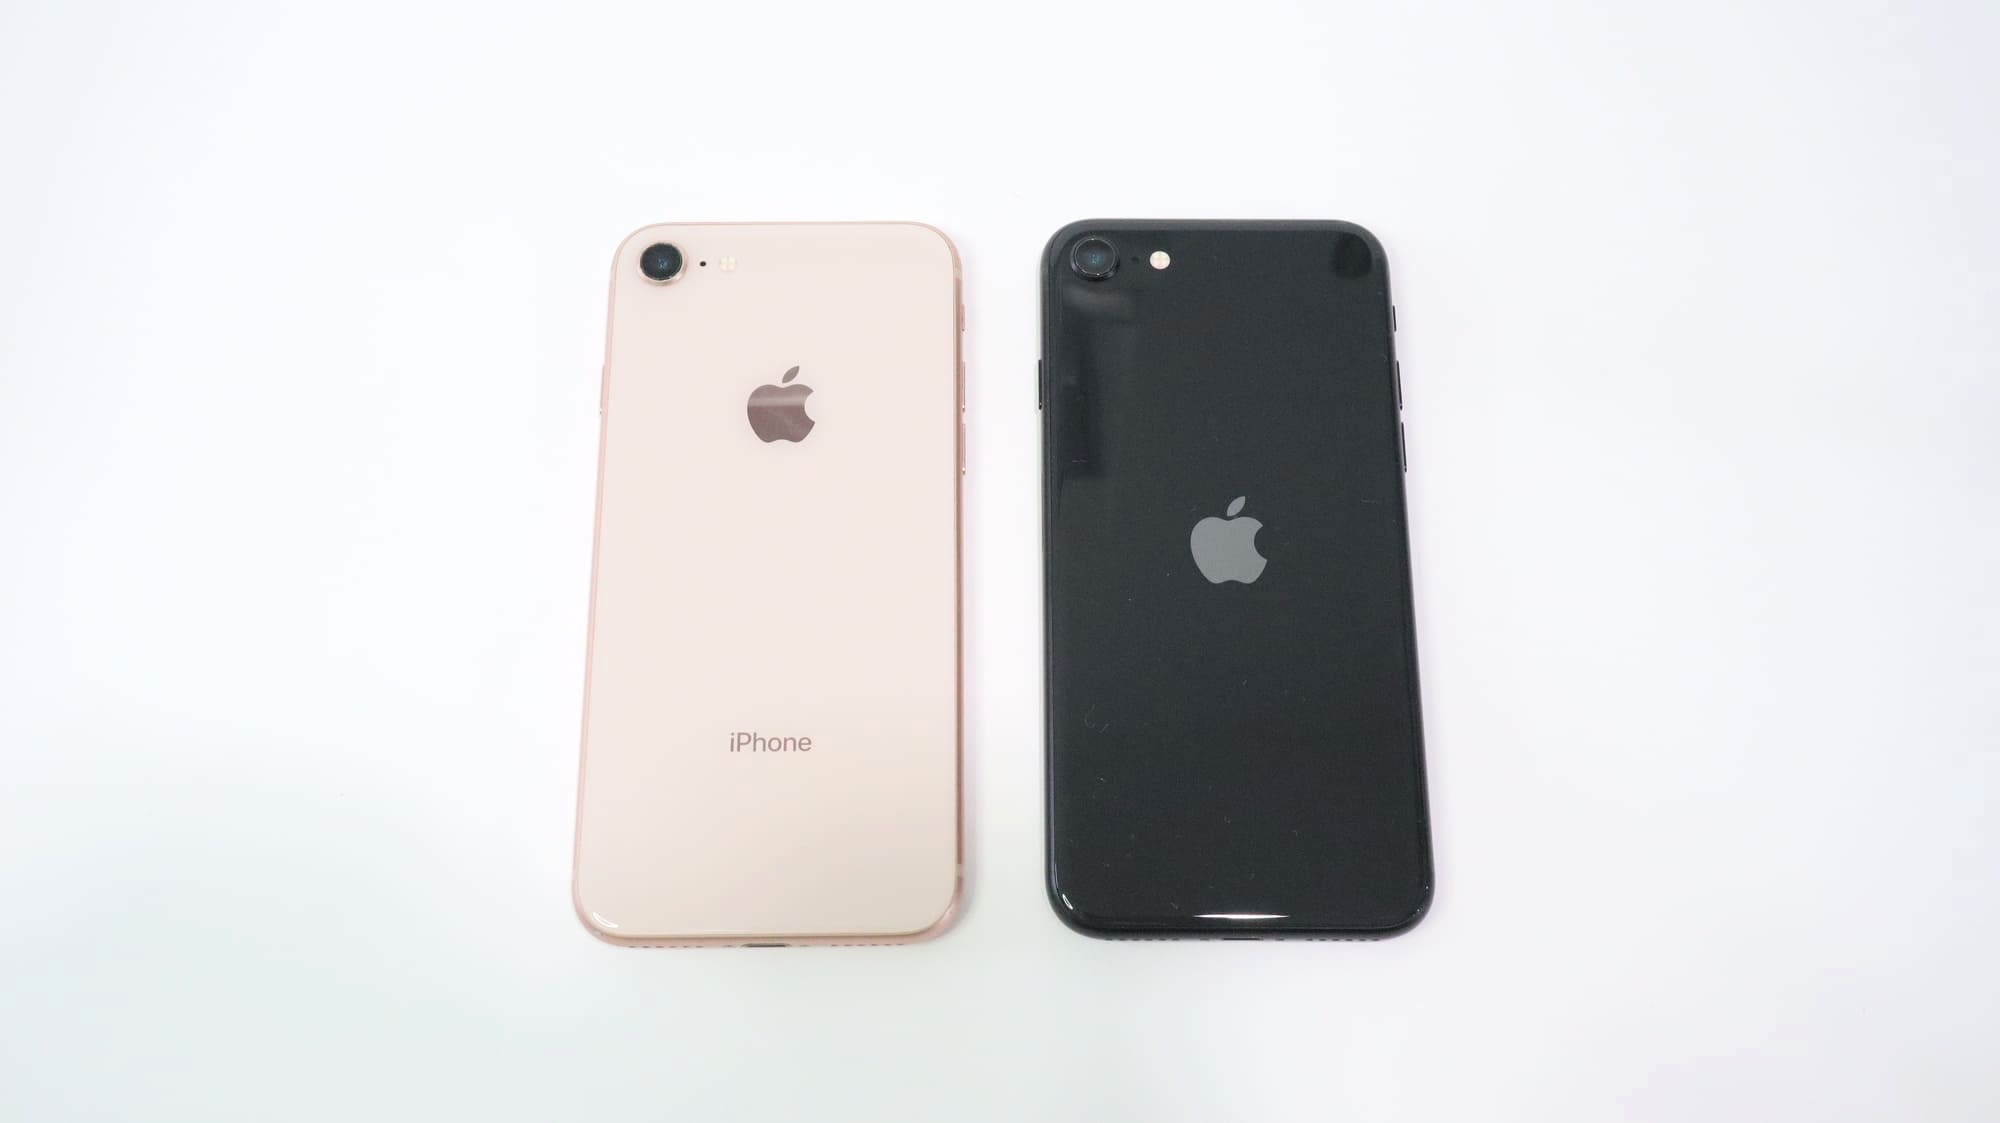 iPhone SEとiPhone8の背面比較